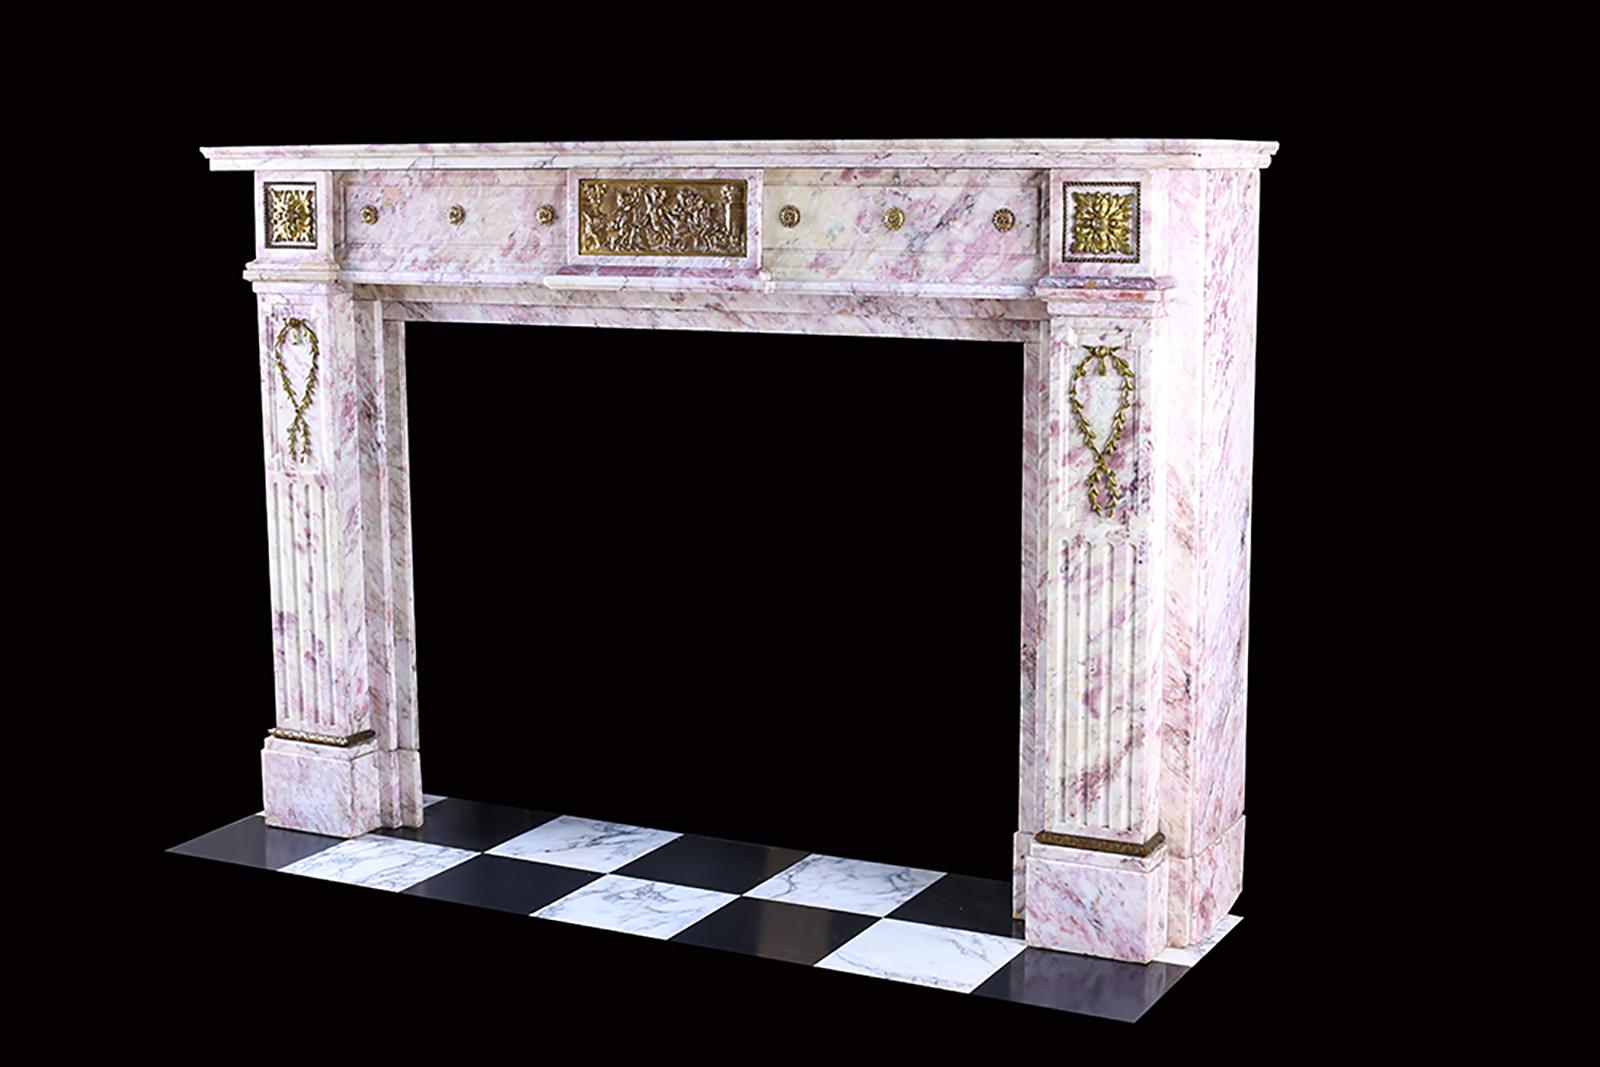 Elegant Louis Xvi Style Fireplace Surround, French, Mid 19th Century For Sale 2